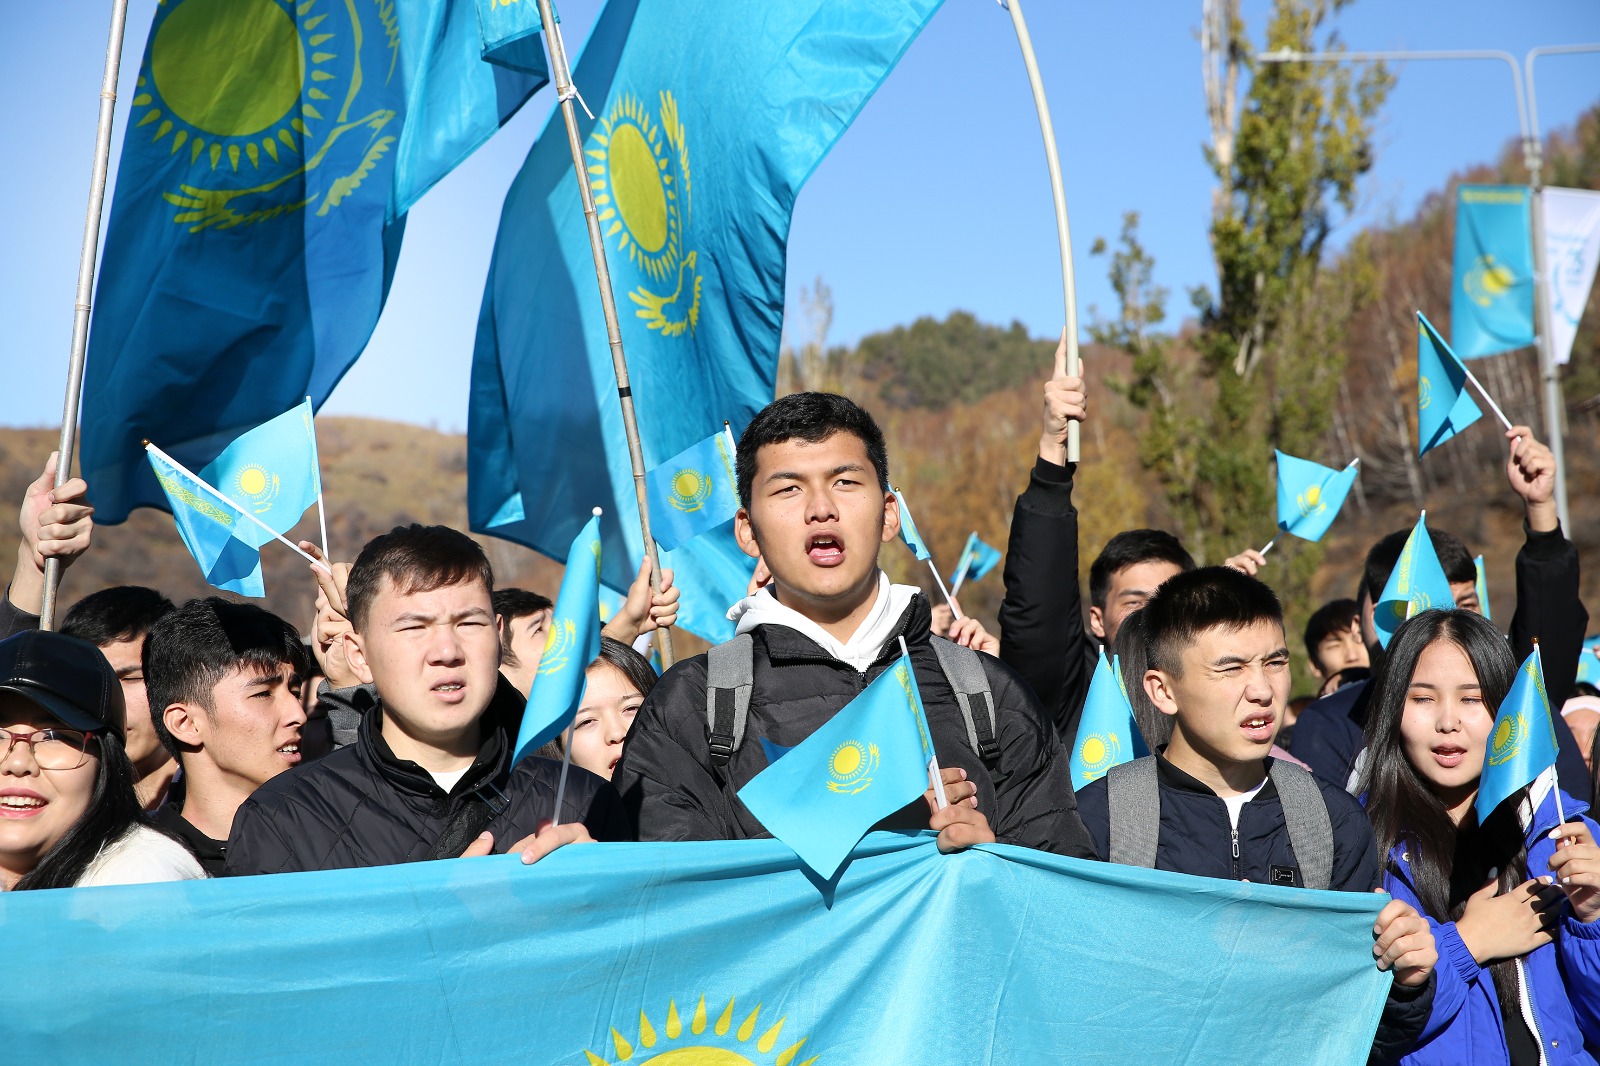 Kazakhstanъs young population has shifted the countryъs dynamics